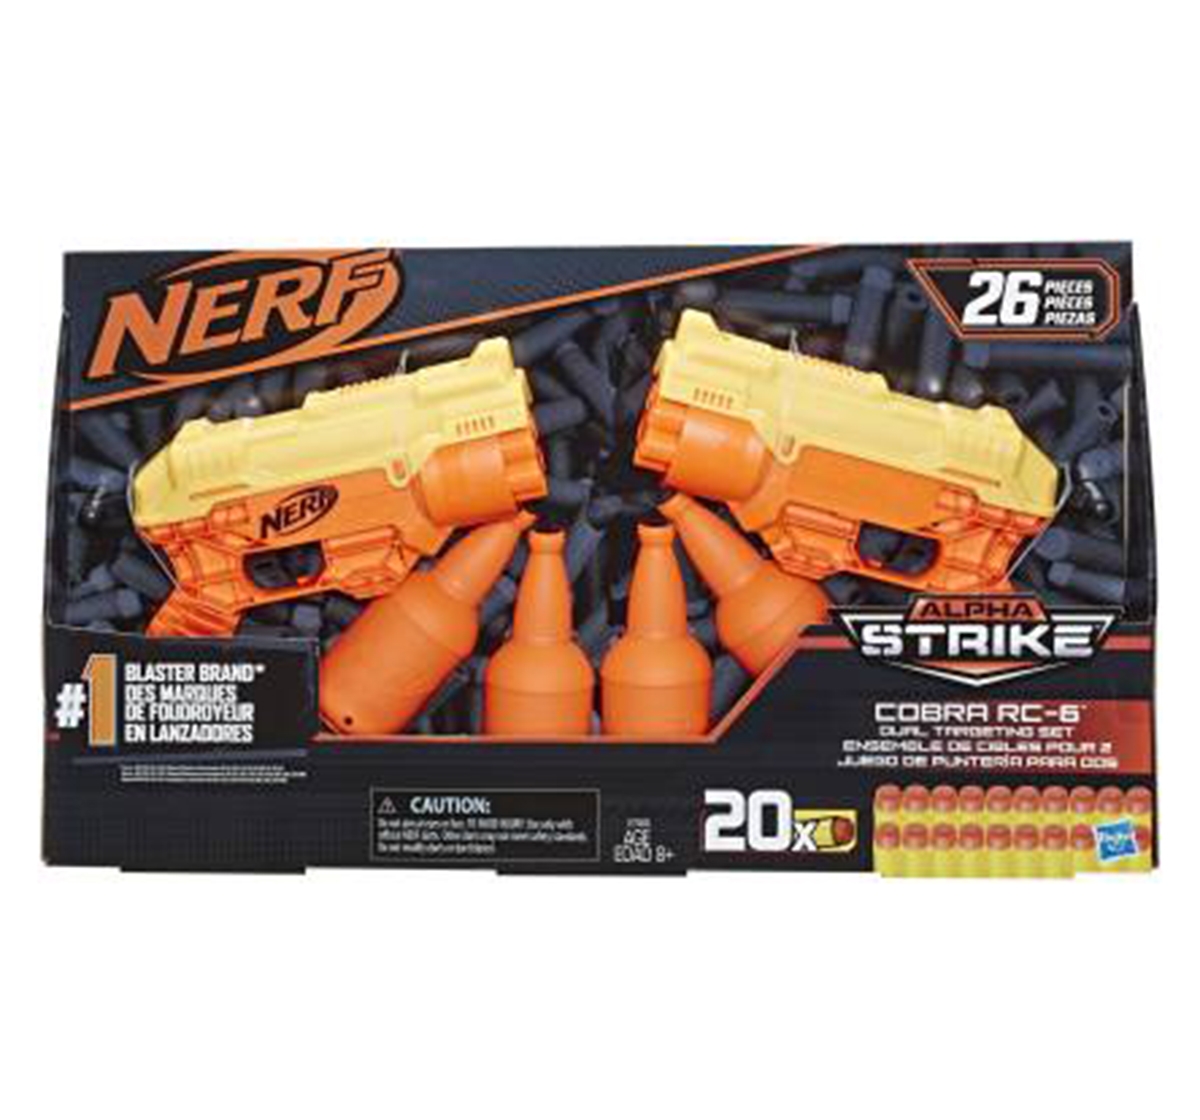 Nerf | NERF Alpha Strike 26-Piece Cobra RC-6 Dual Targeting Set, Includes 2 Toy Blasters, 4 Half-Targets, and 20 Official Nerf Elite Darts, Multicolor, 8Y+ 1